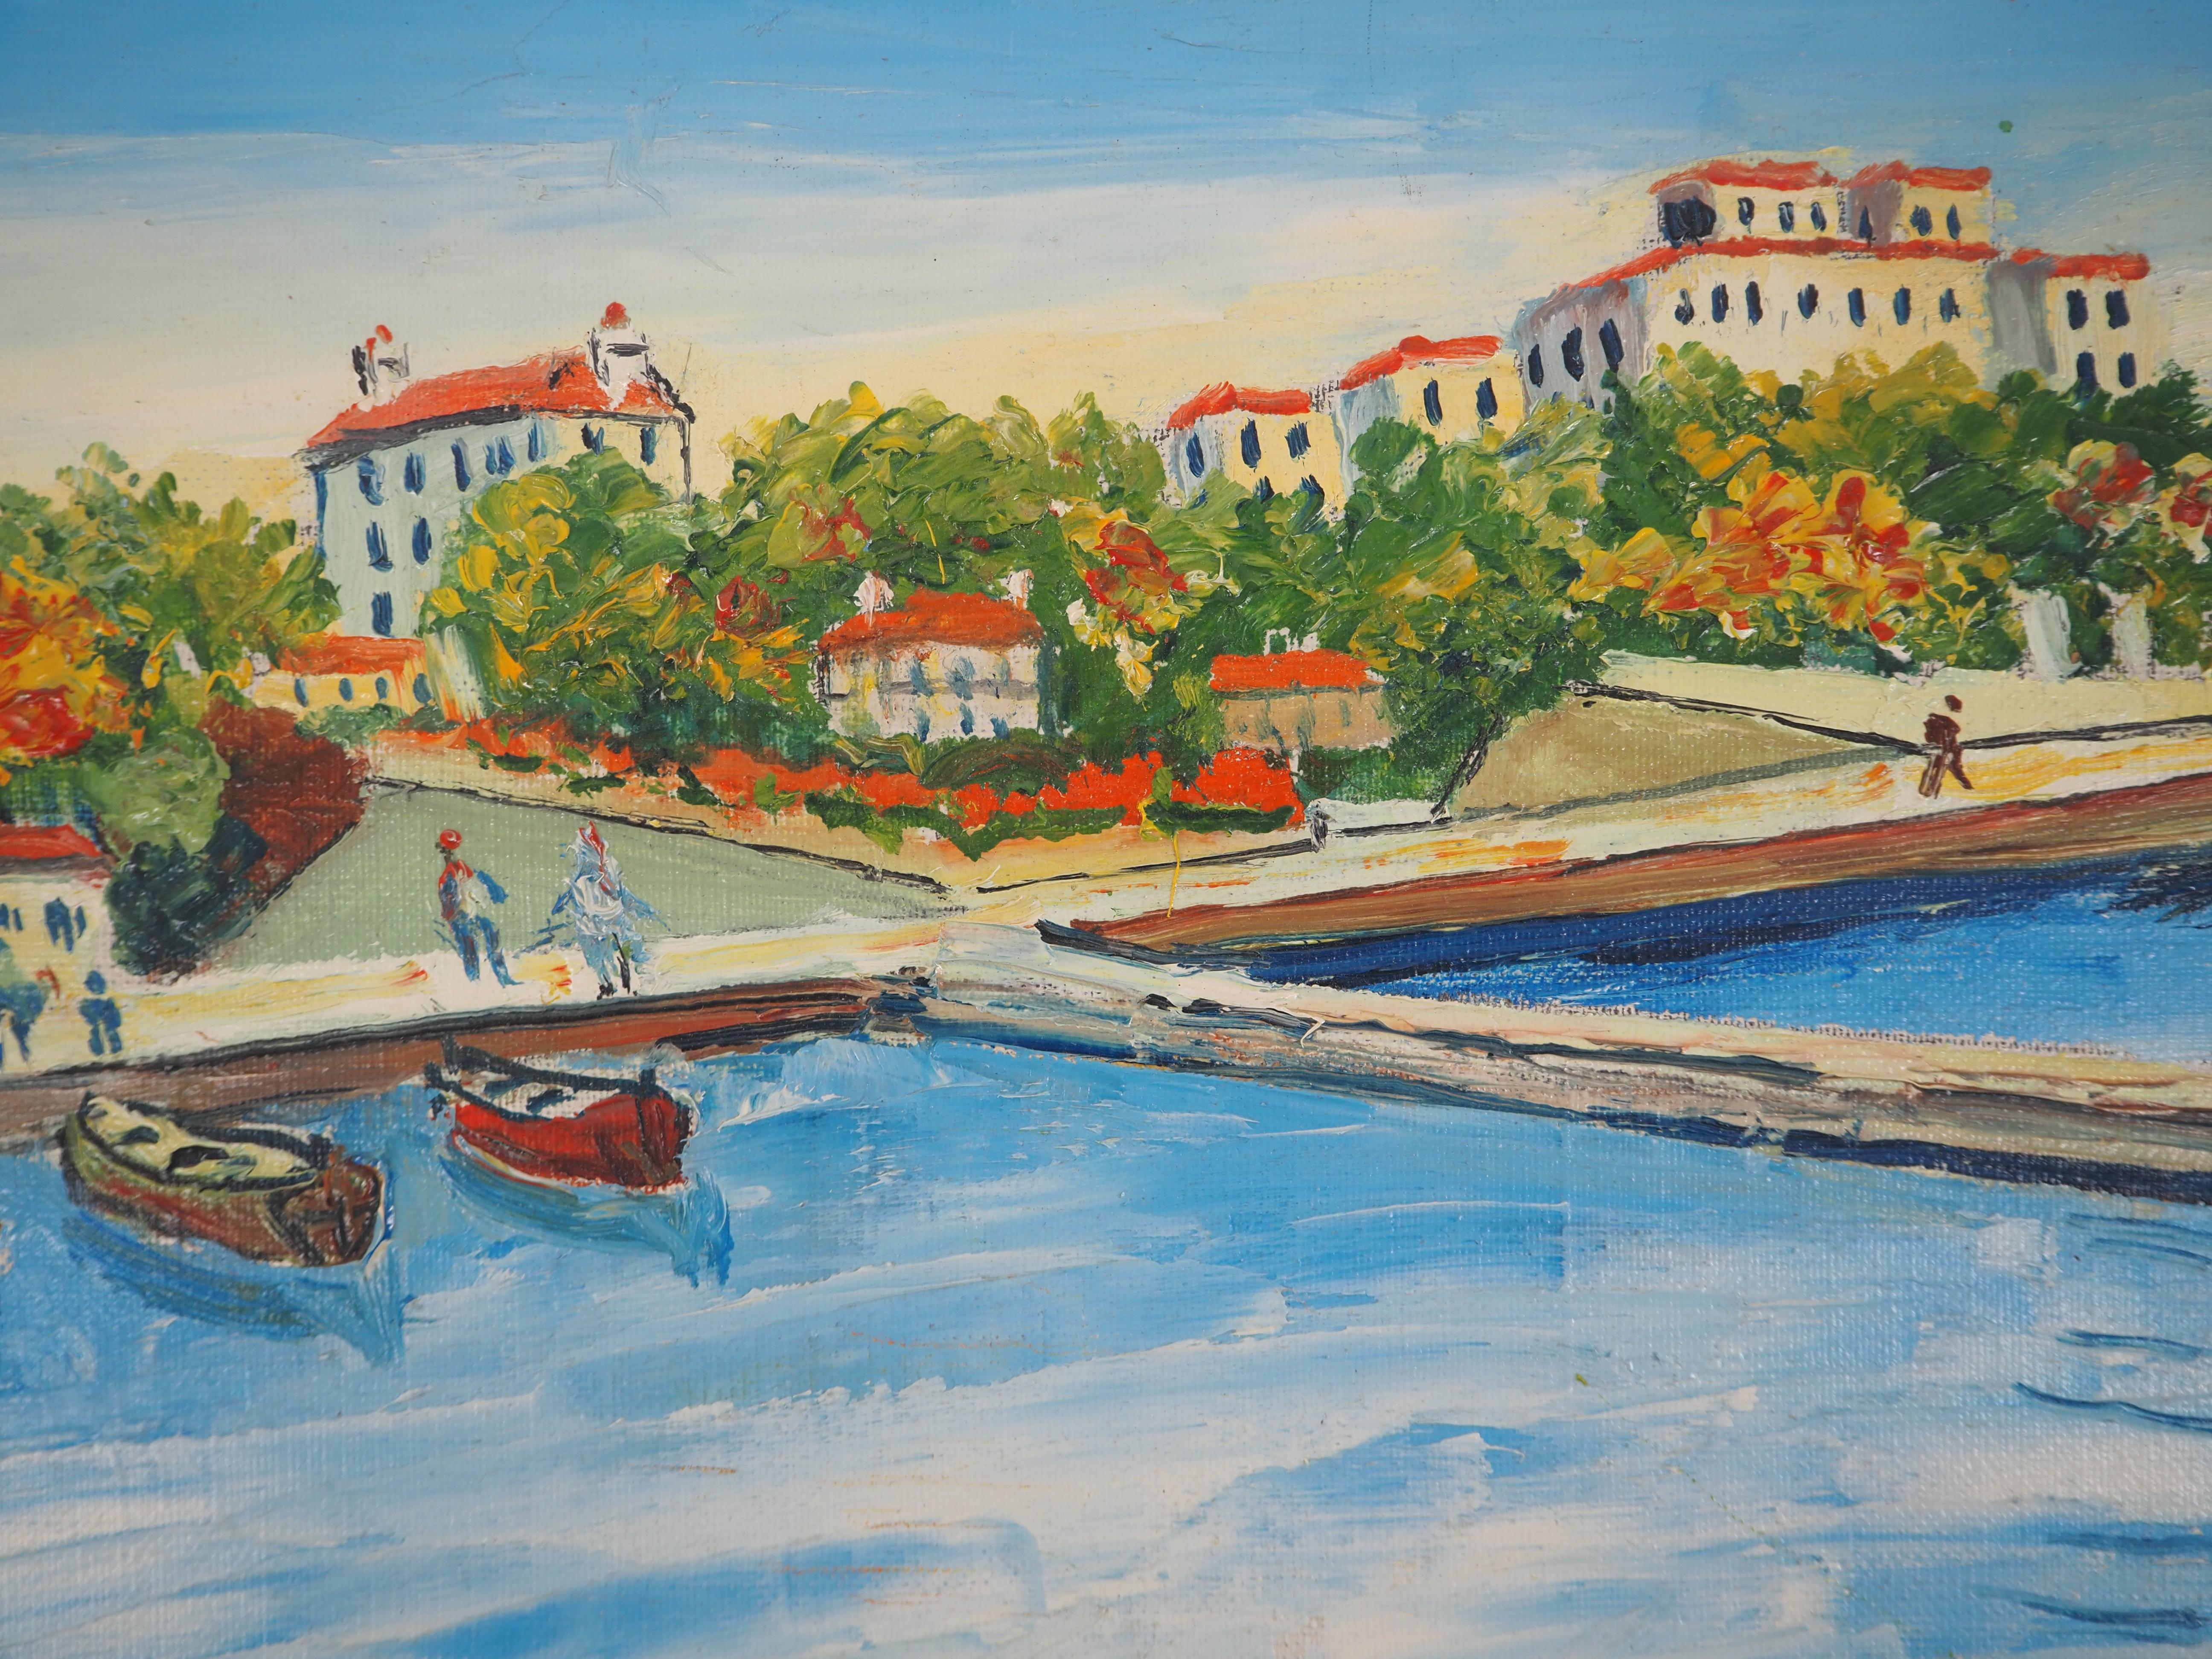 Elisée MACLET (1881-1962)
French Riviera : The Small Harbor of Beaulieu, c. 1935

Original oil on canvas
Signed bottom left
Signed and titled on the back
On canvas 33 x 40 cm at view (c. 13 x 16 in) 

Very good condition, light surface defects